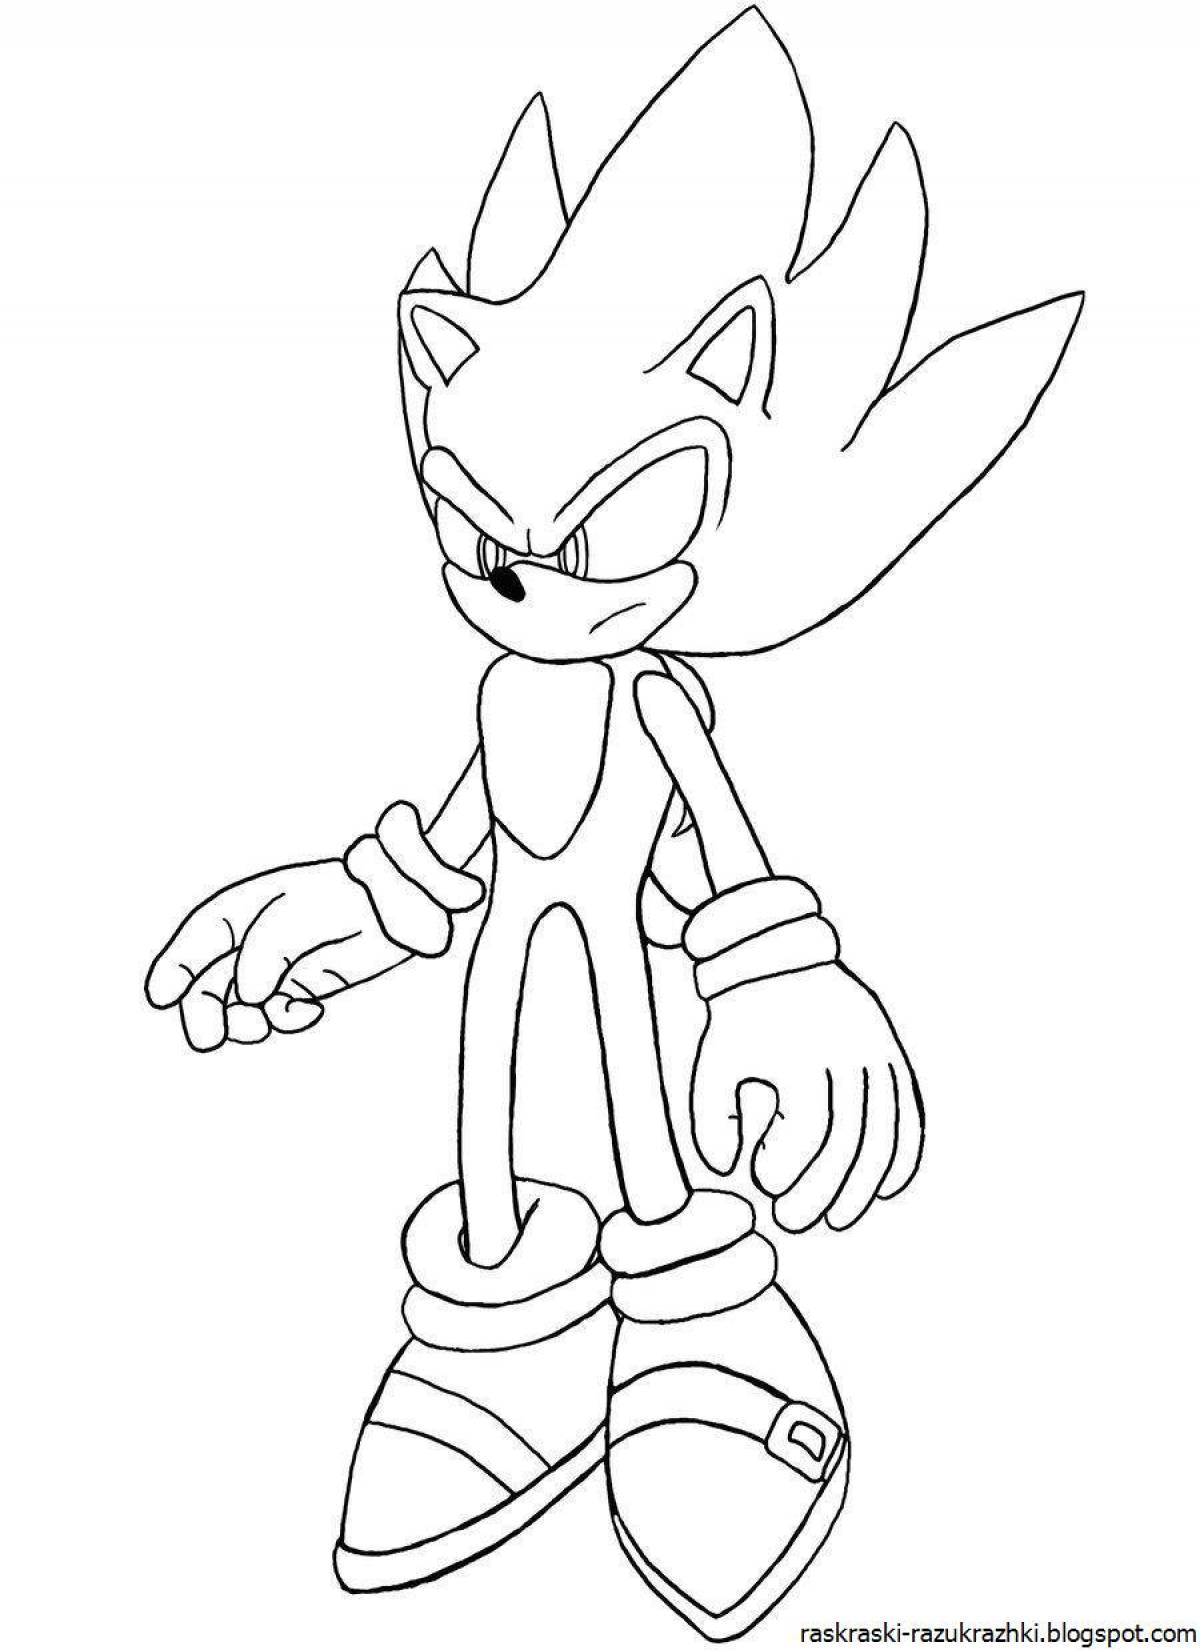 Fun sonic coloring page